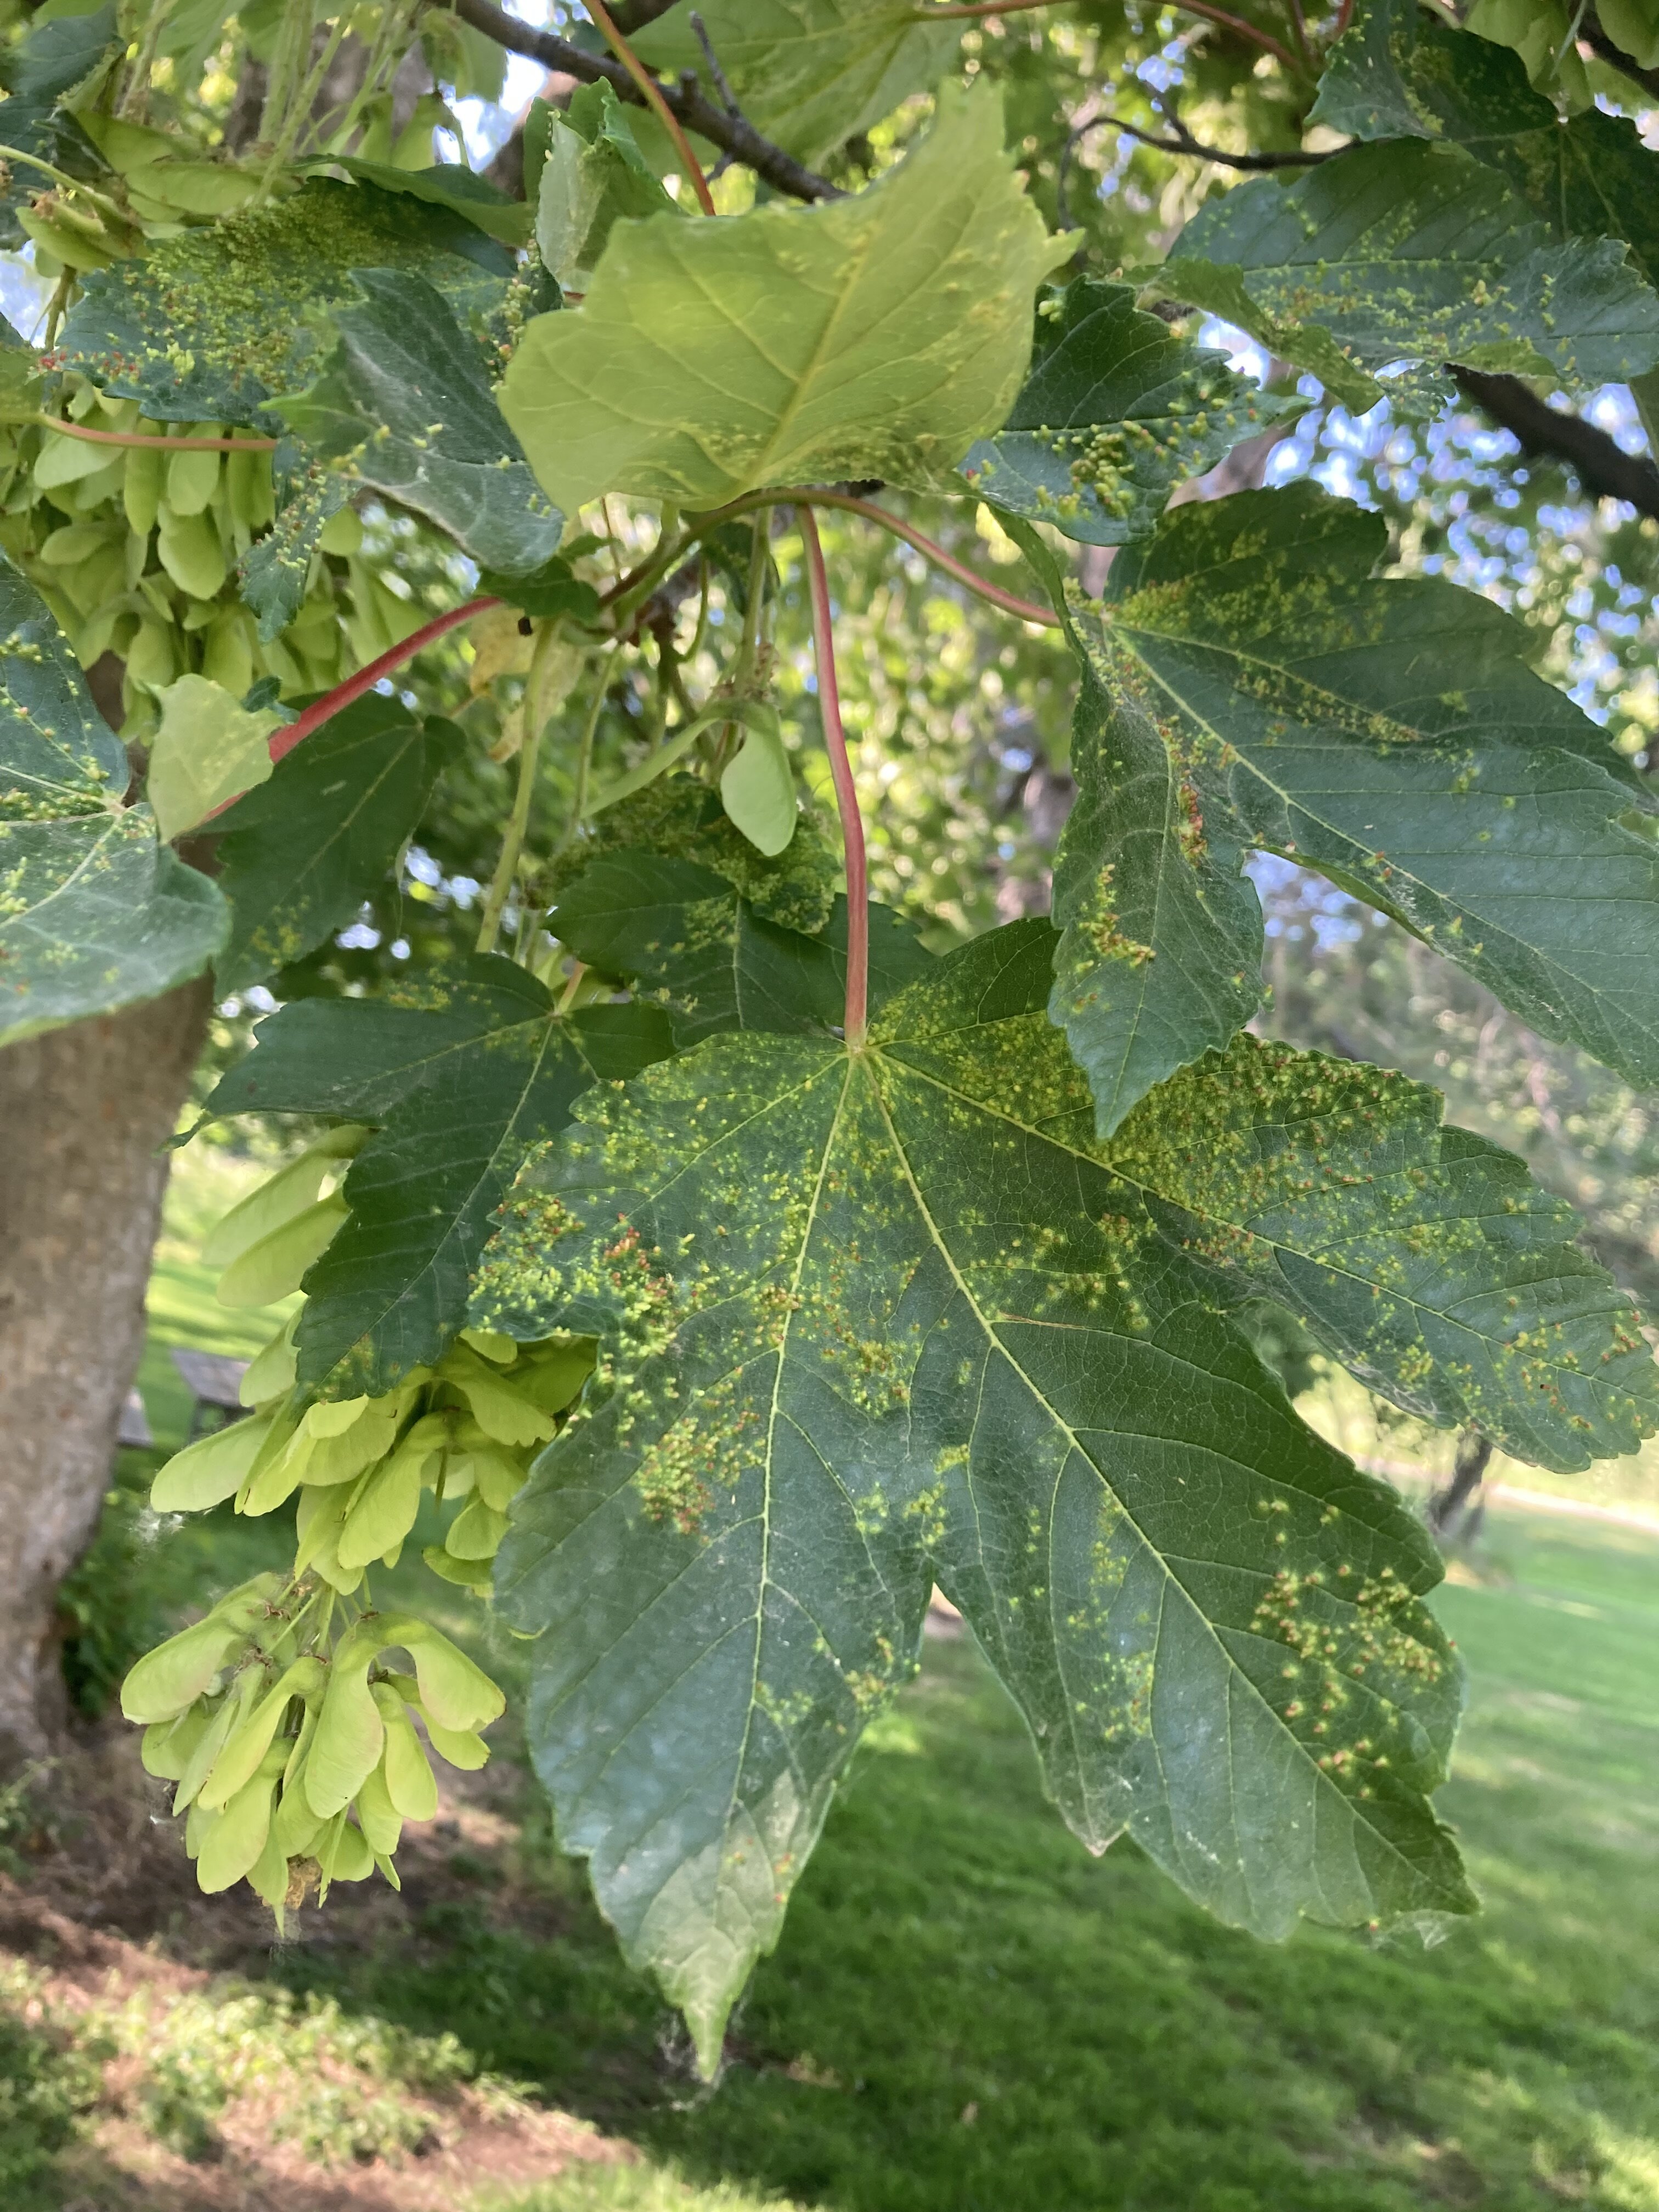 What kind of maple is this?